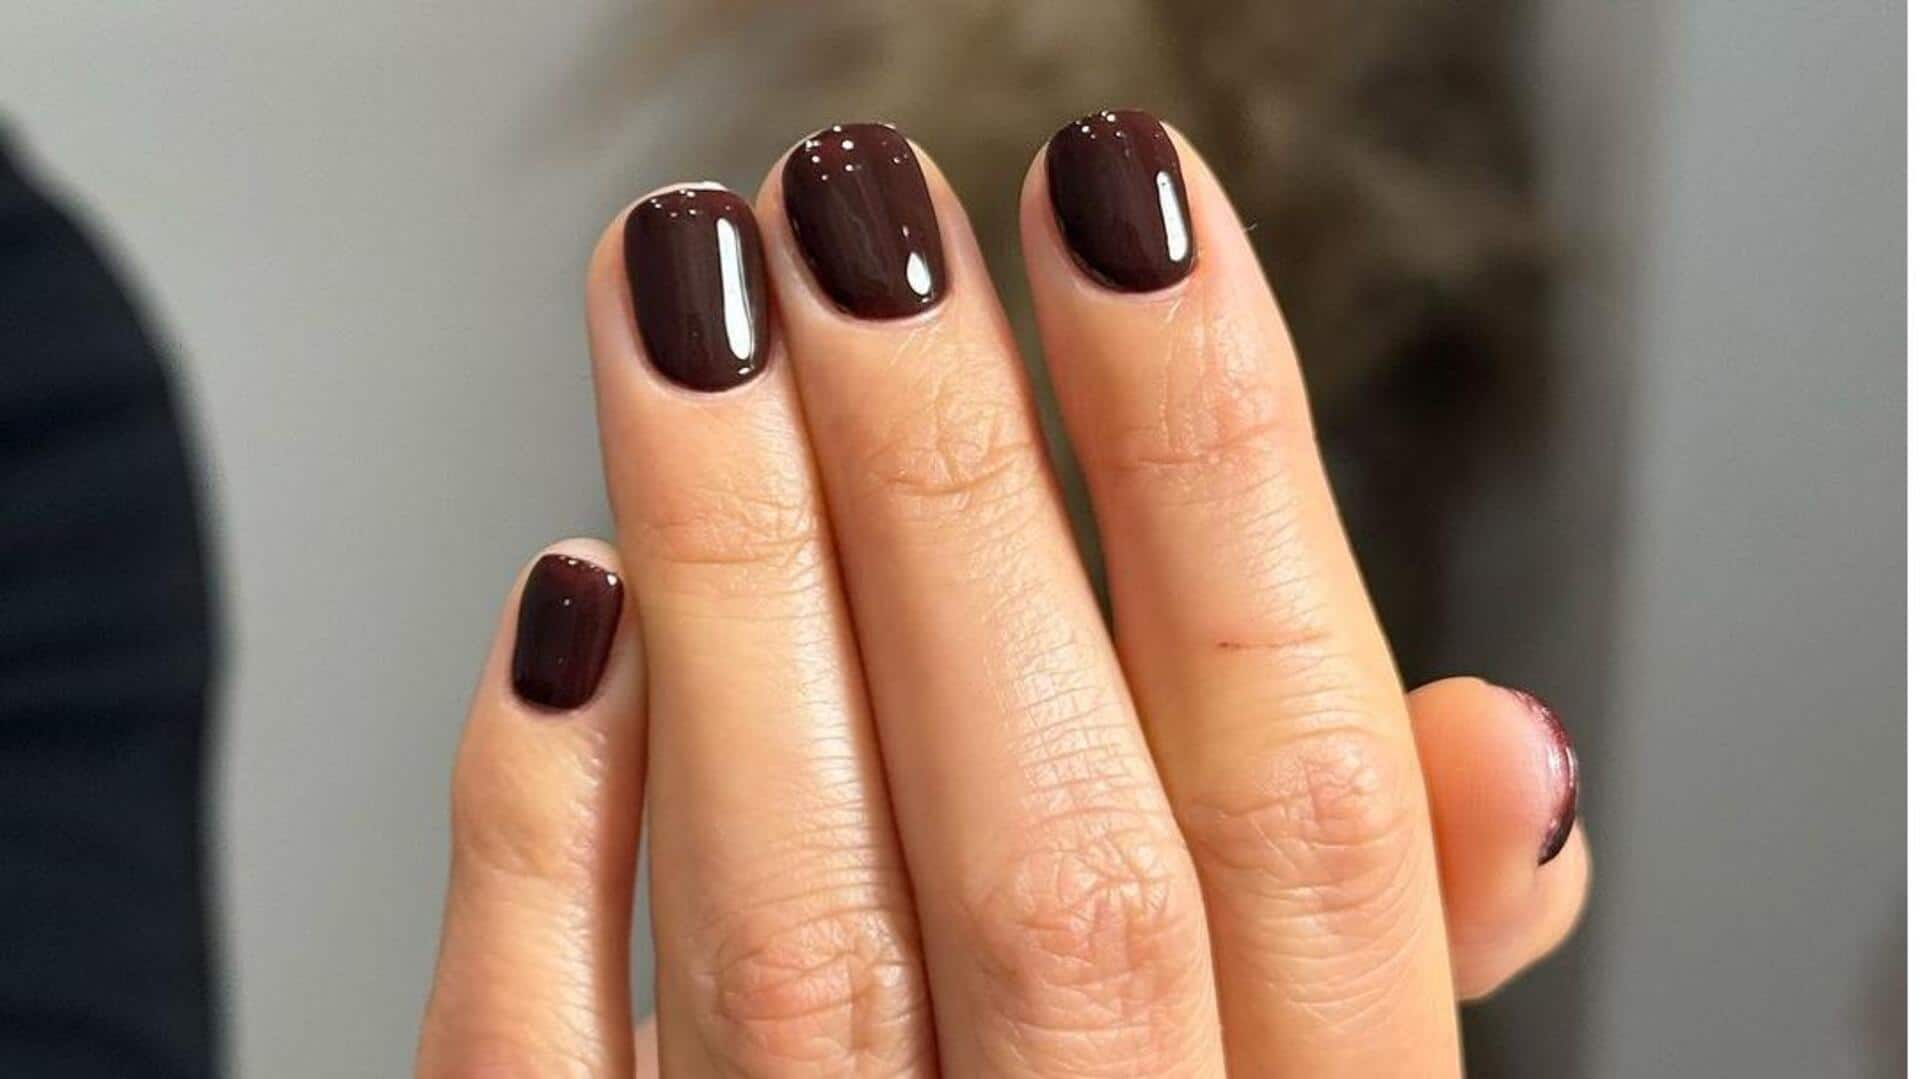 Russian manicure: Here's what you need to know